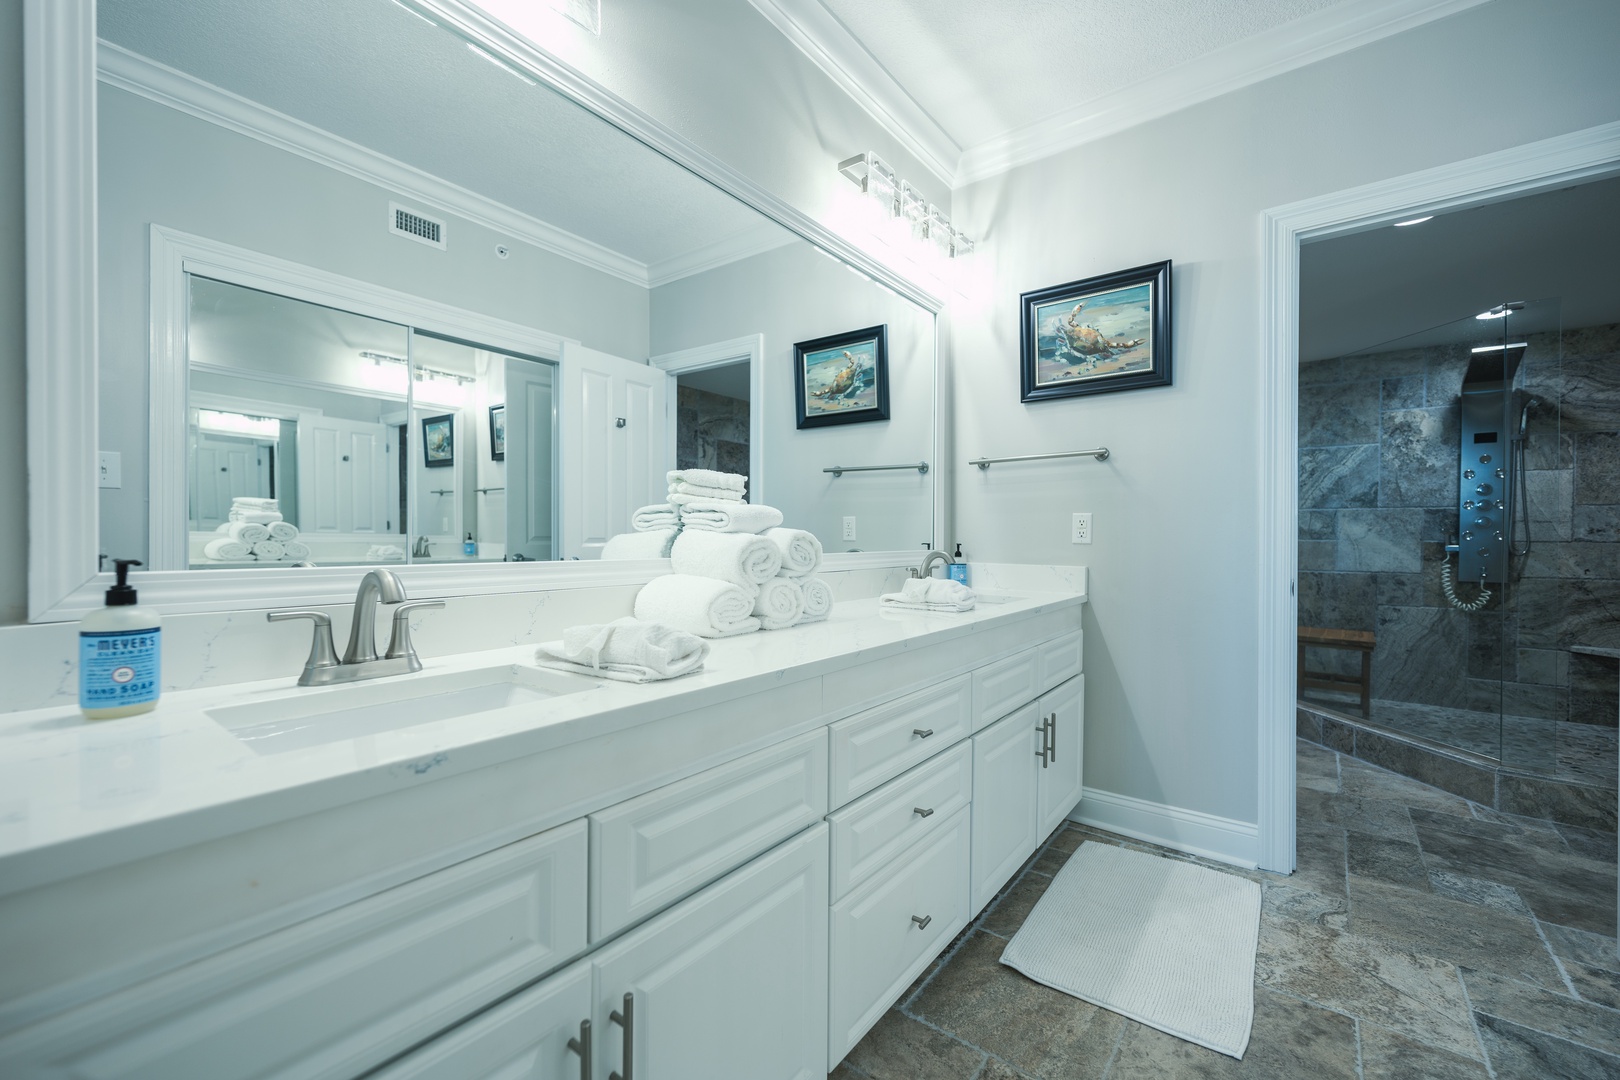 The king ensuite bathroom is a special relaxation oasis featuring everything you need to feel refreshed and rejuvenated.